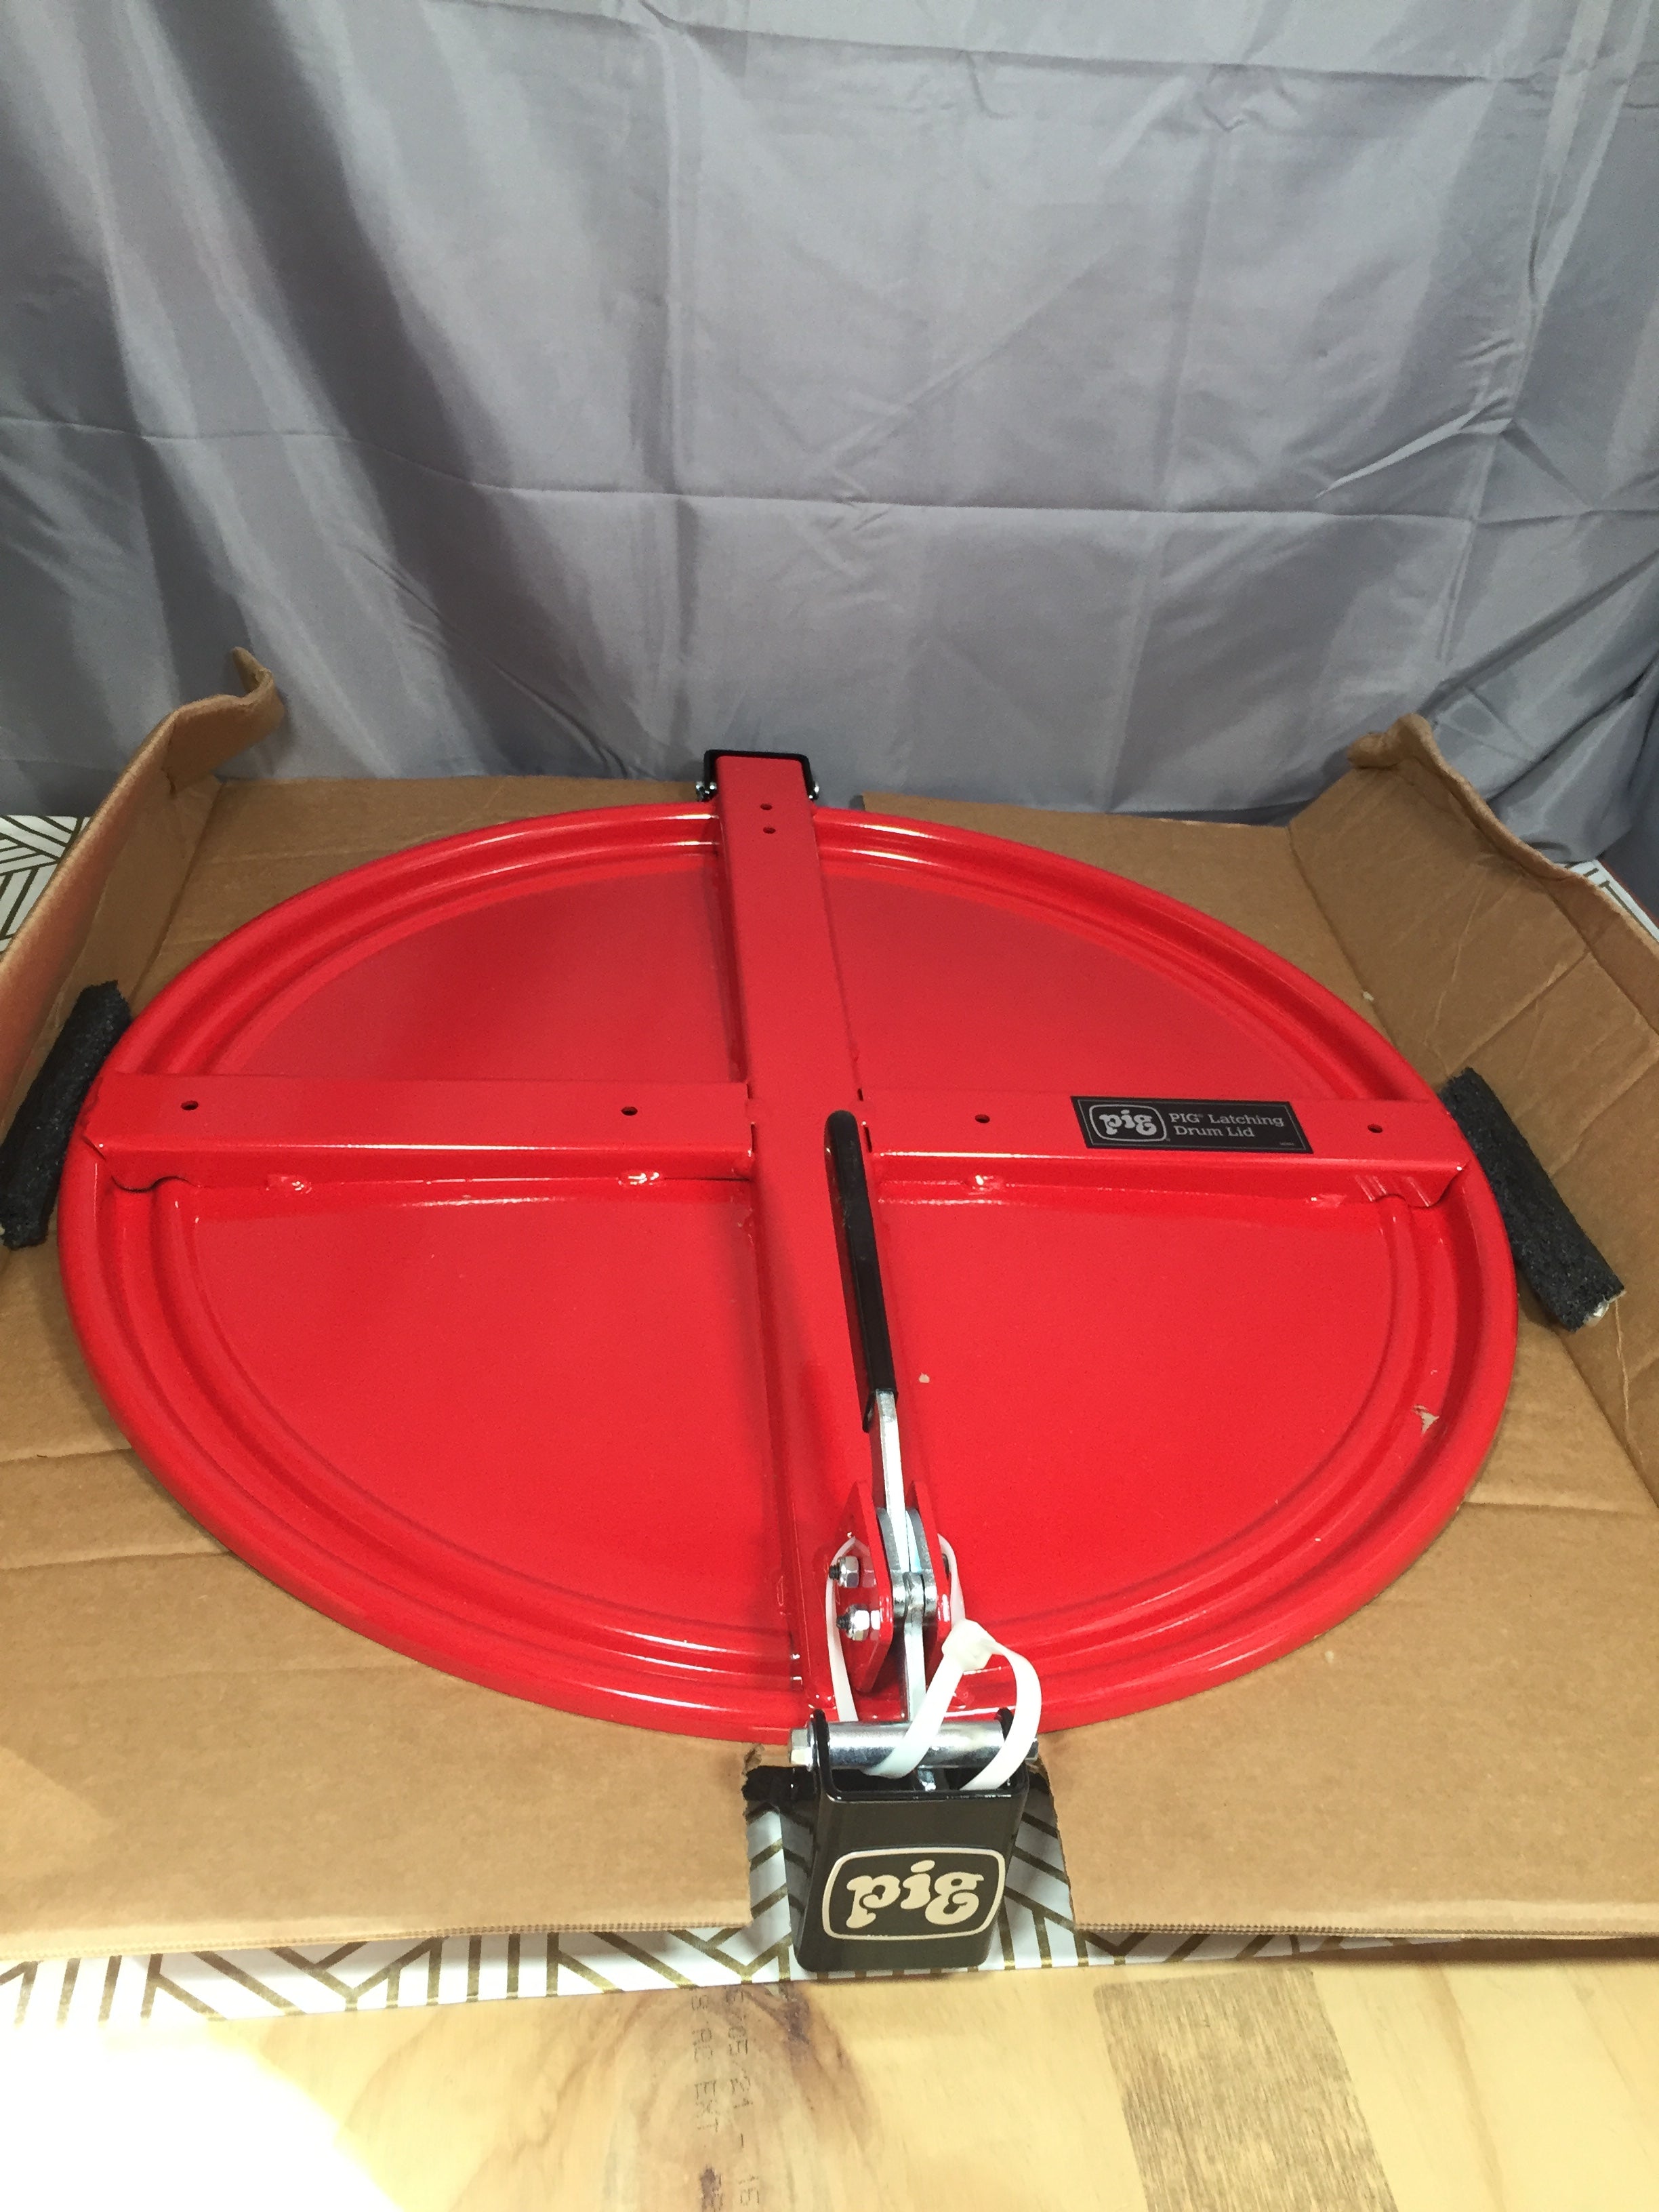 New Pig Corporation DRM659-RD PIGÂ Latching Drum Lid 55 Gallon - Red (8128992575726)